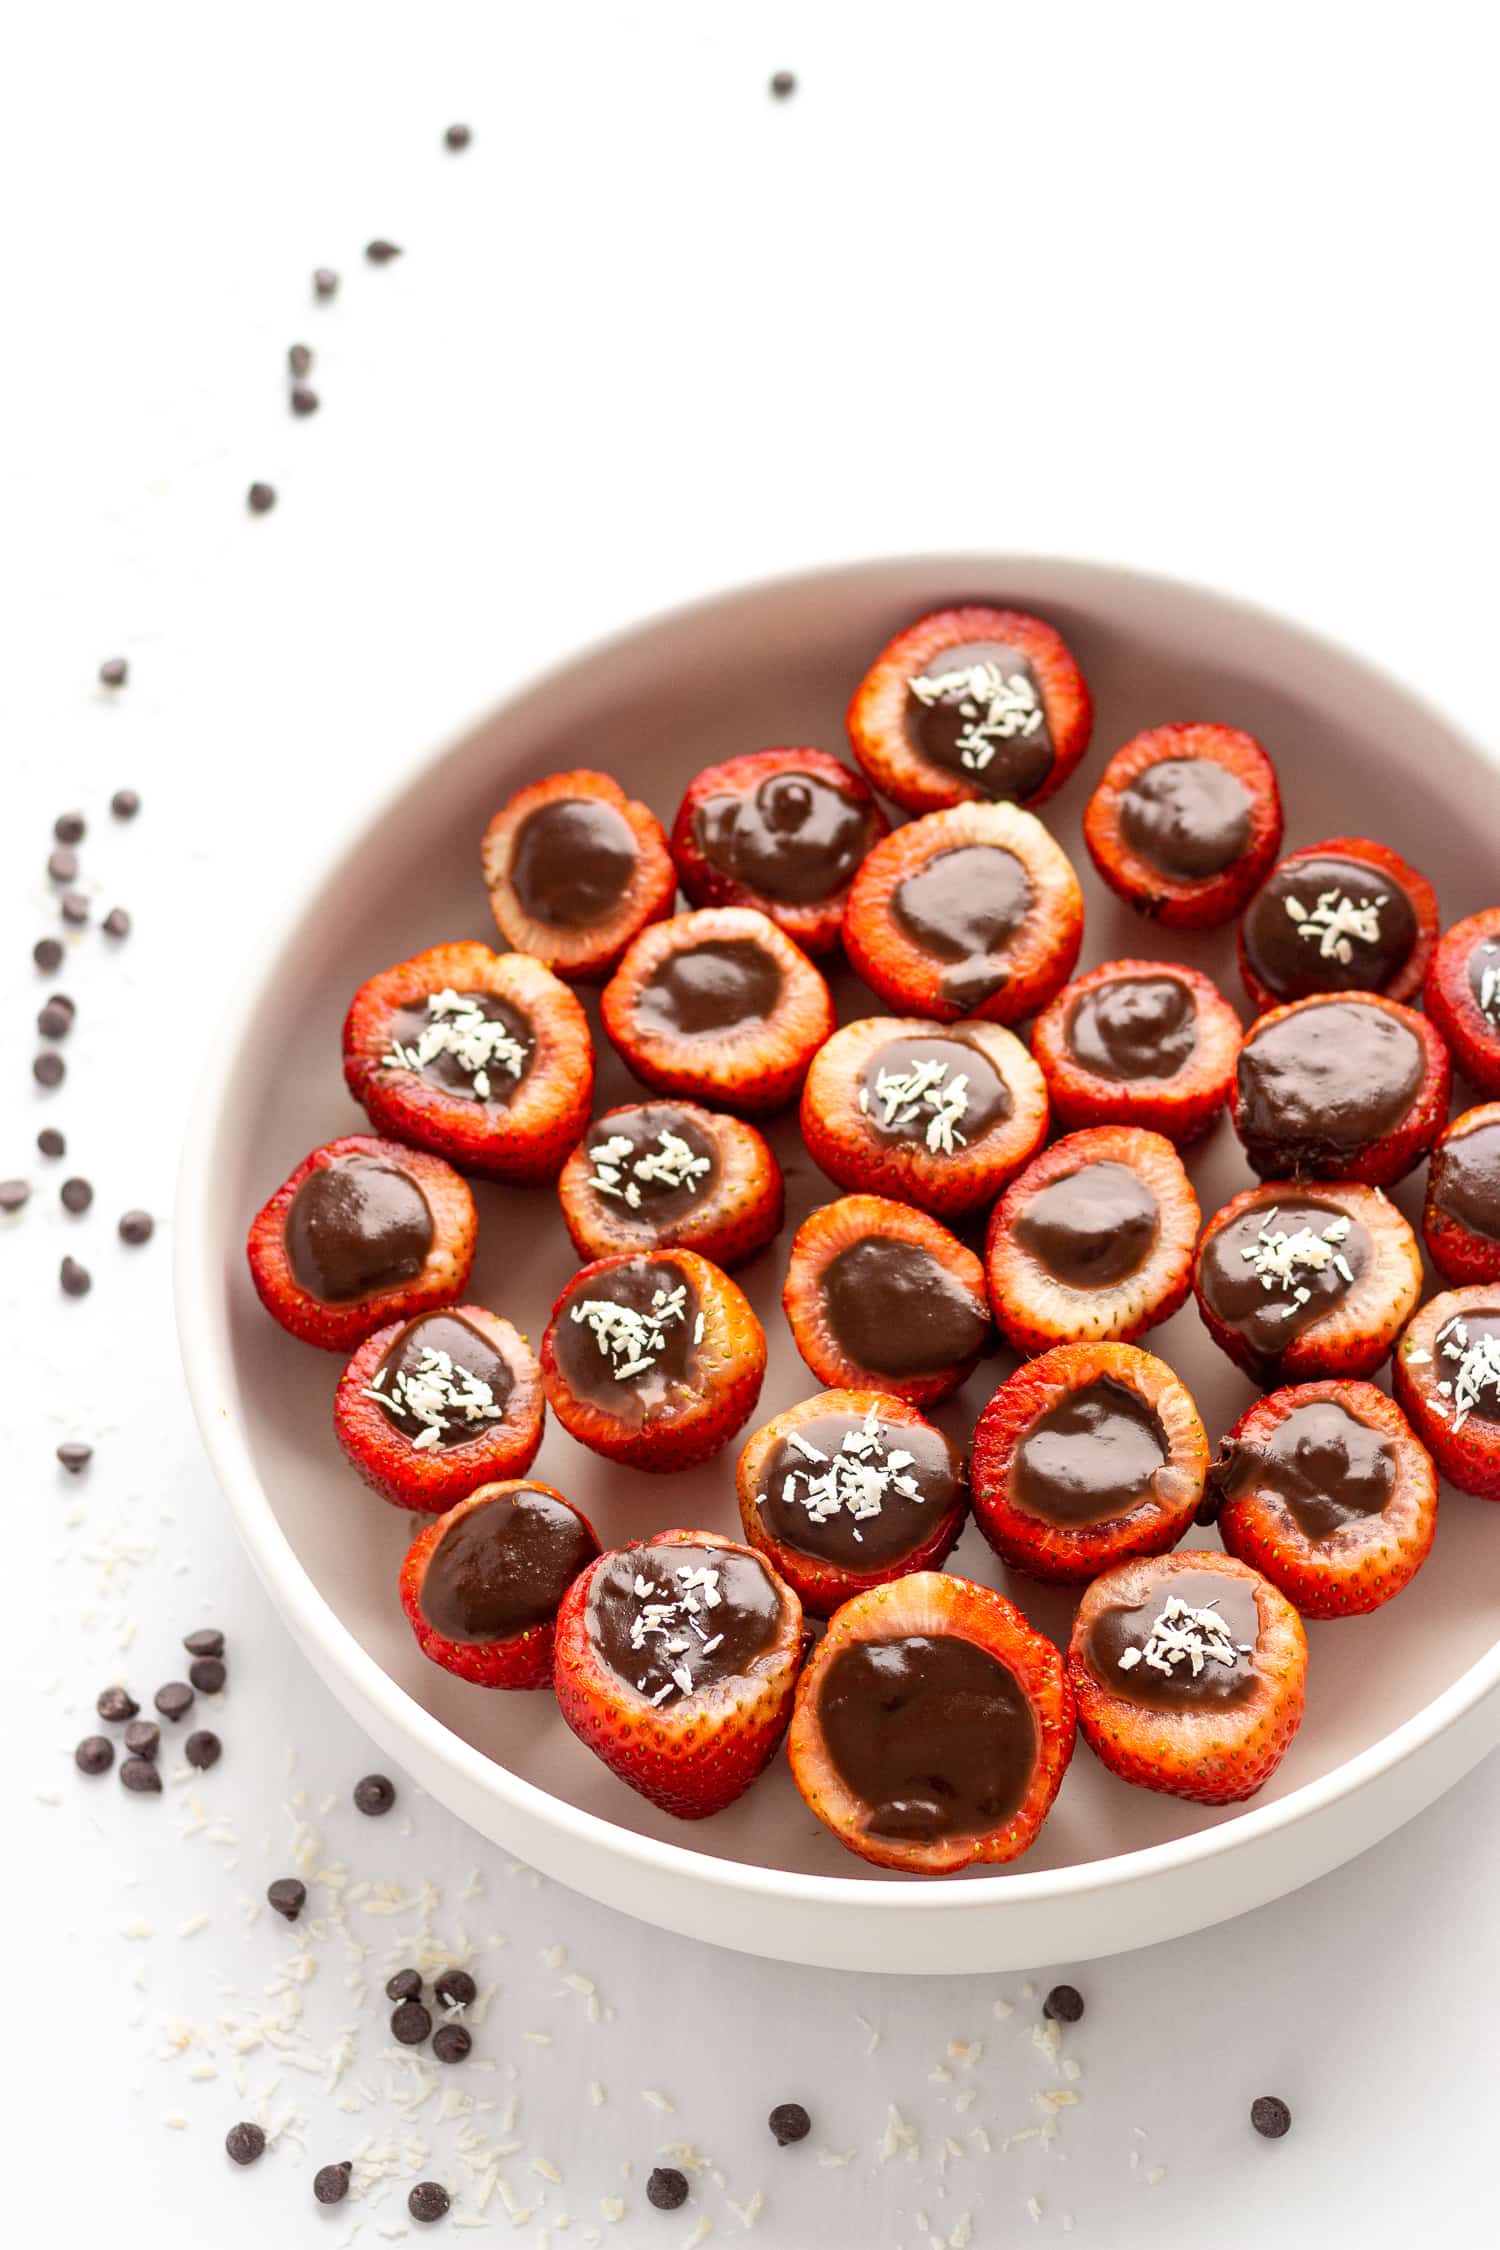 White bowl filled with chocolate coconut cream stuffed strawberries with chocolate chips and shredded coconut scattered beside the bowl.